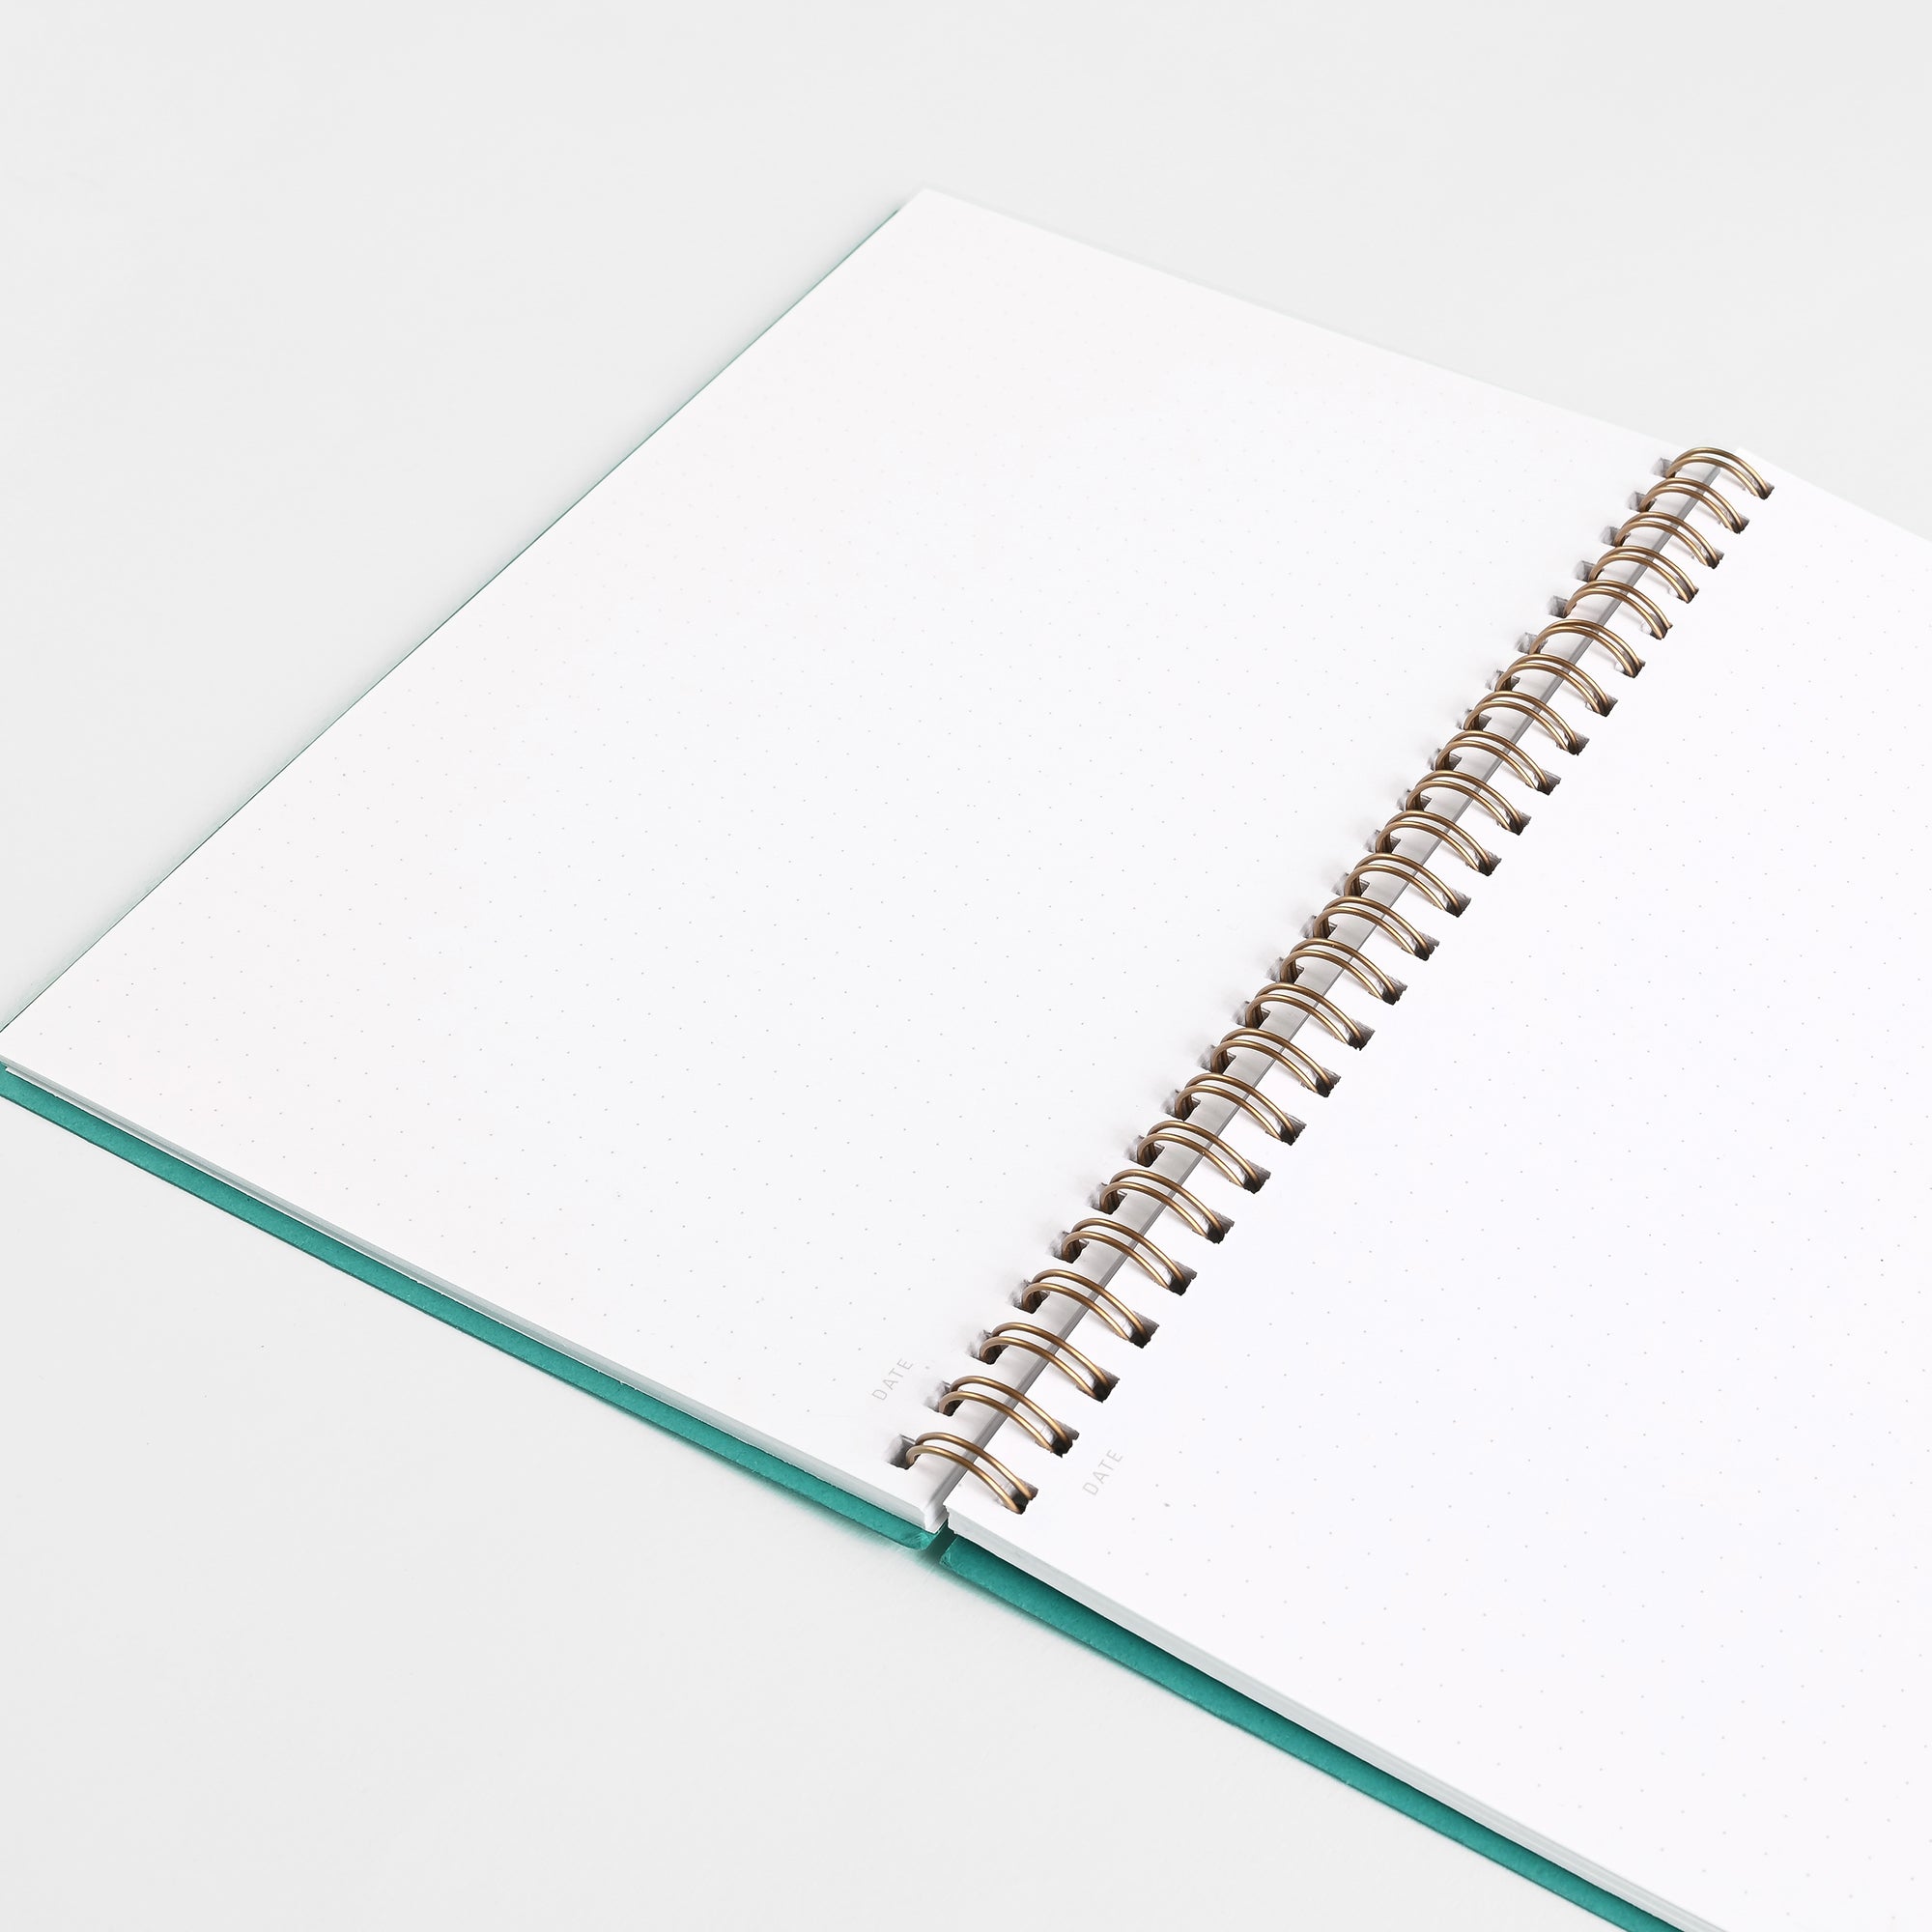 Calepino Greer x Calepino Dot Grid Notebook Turquoise 